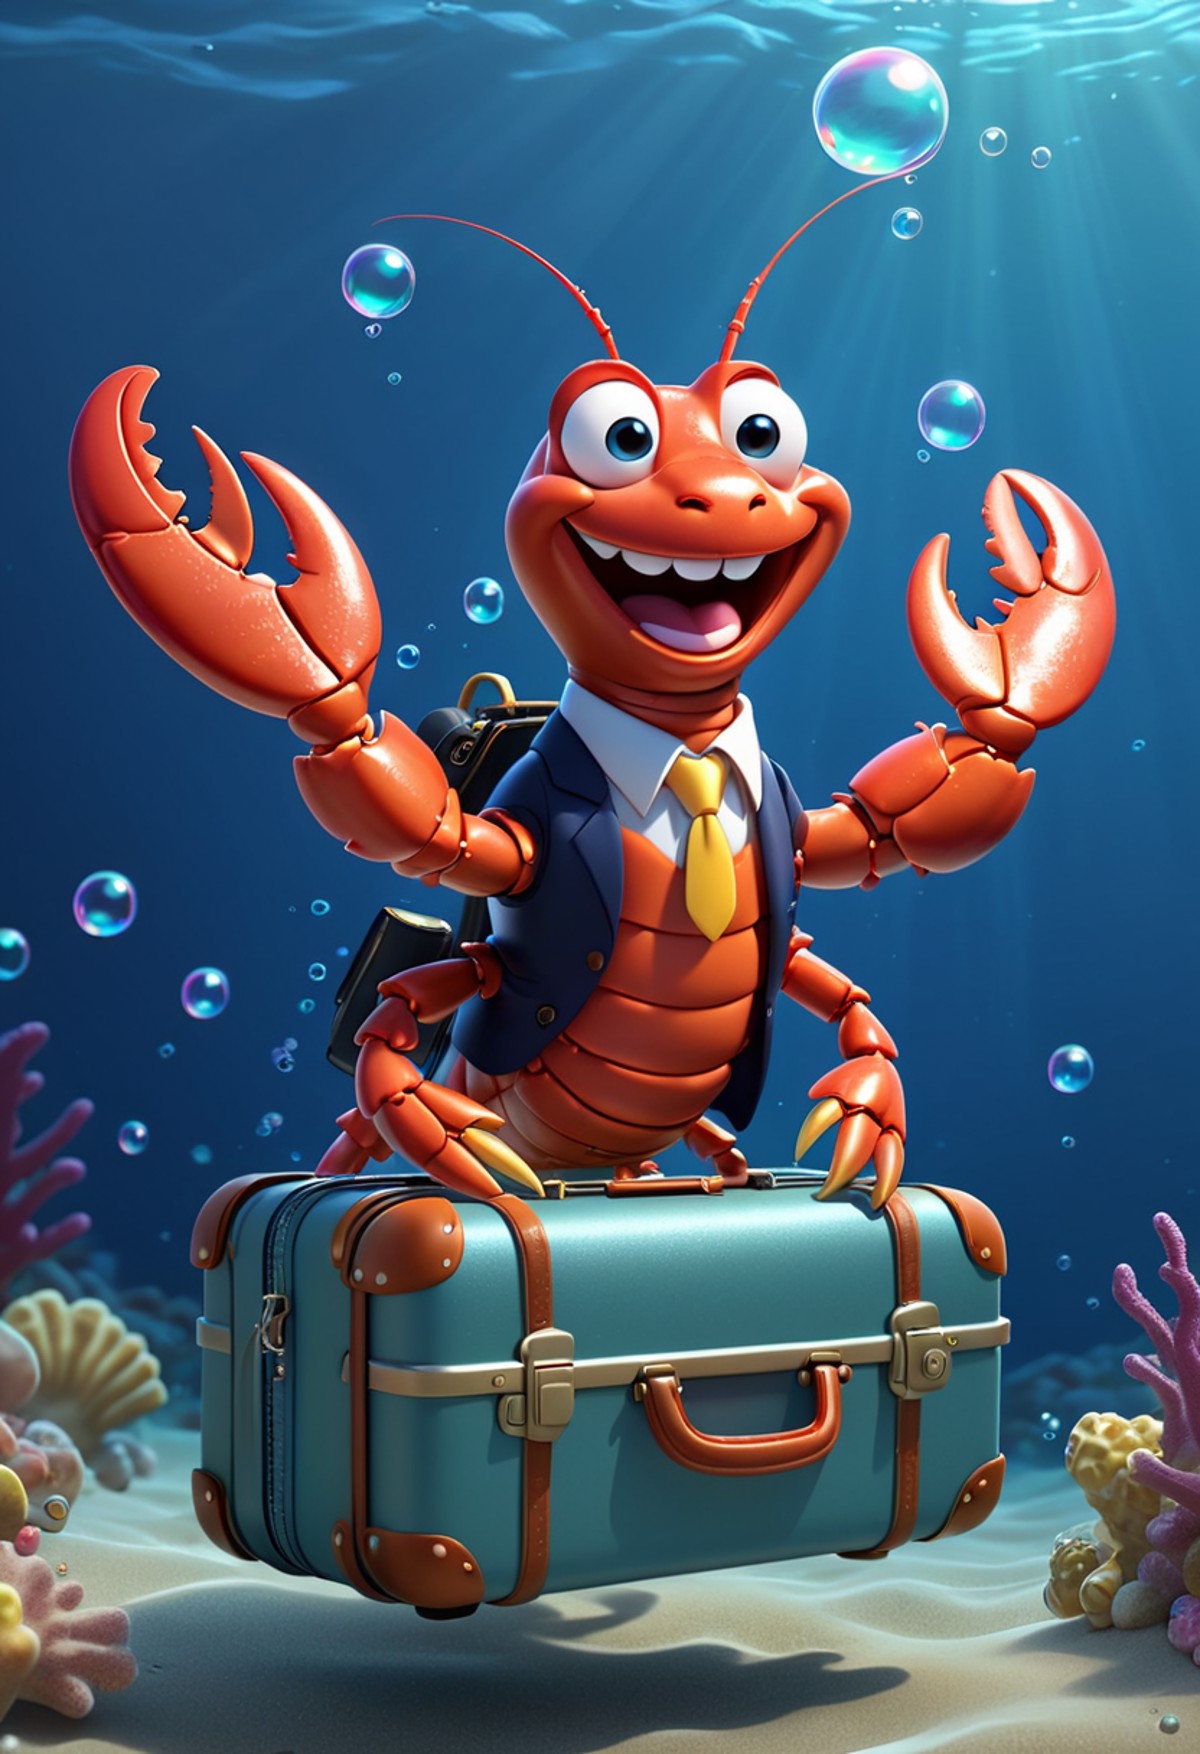 pixar style of  lobster, as a cartoon business  man character,  tinny cute, ((( luminous))), carring a little suitcase, in...